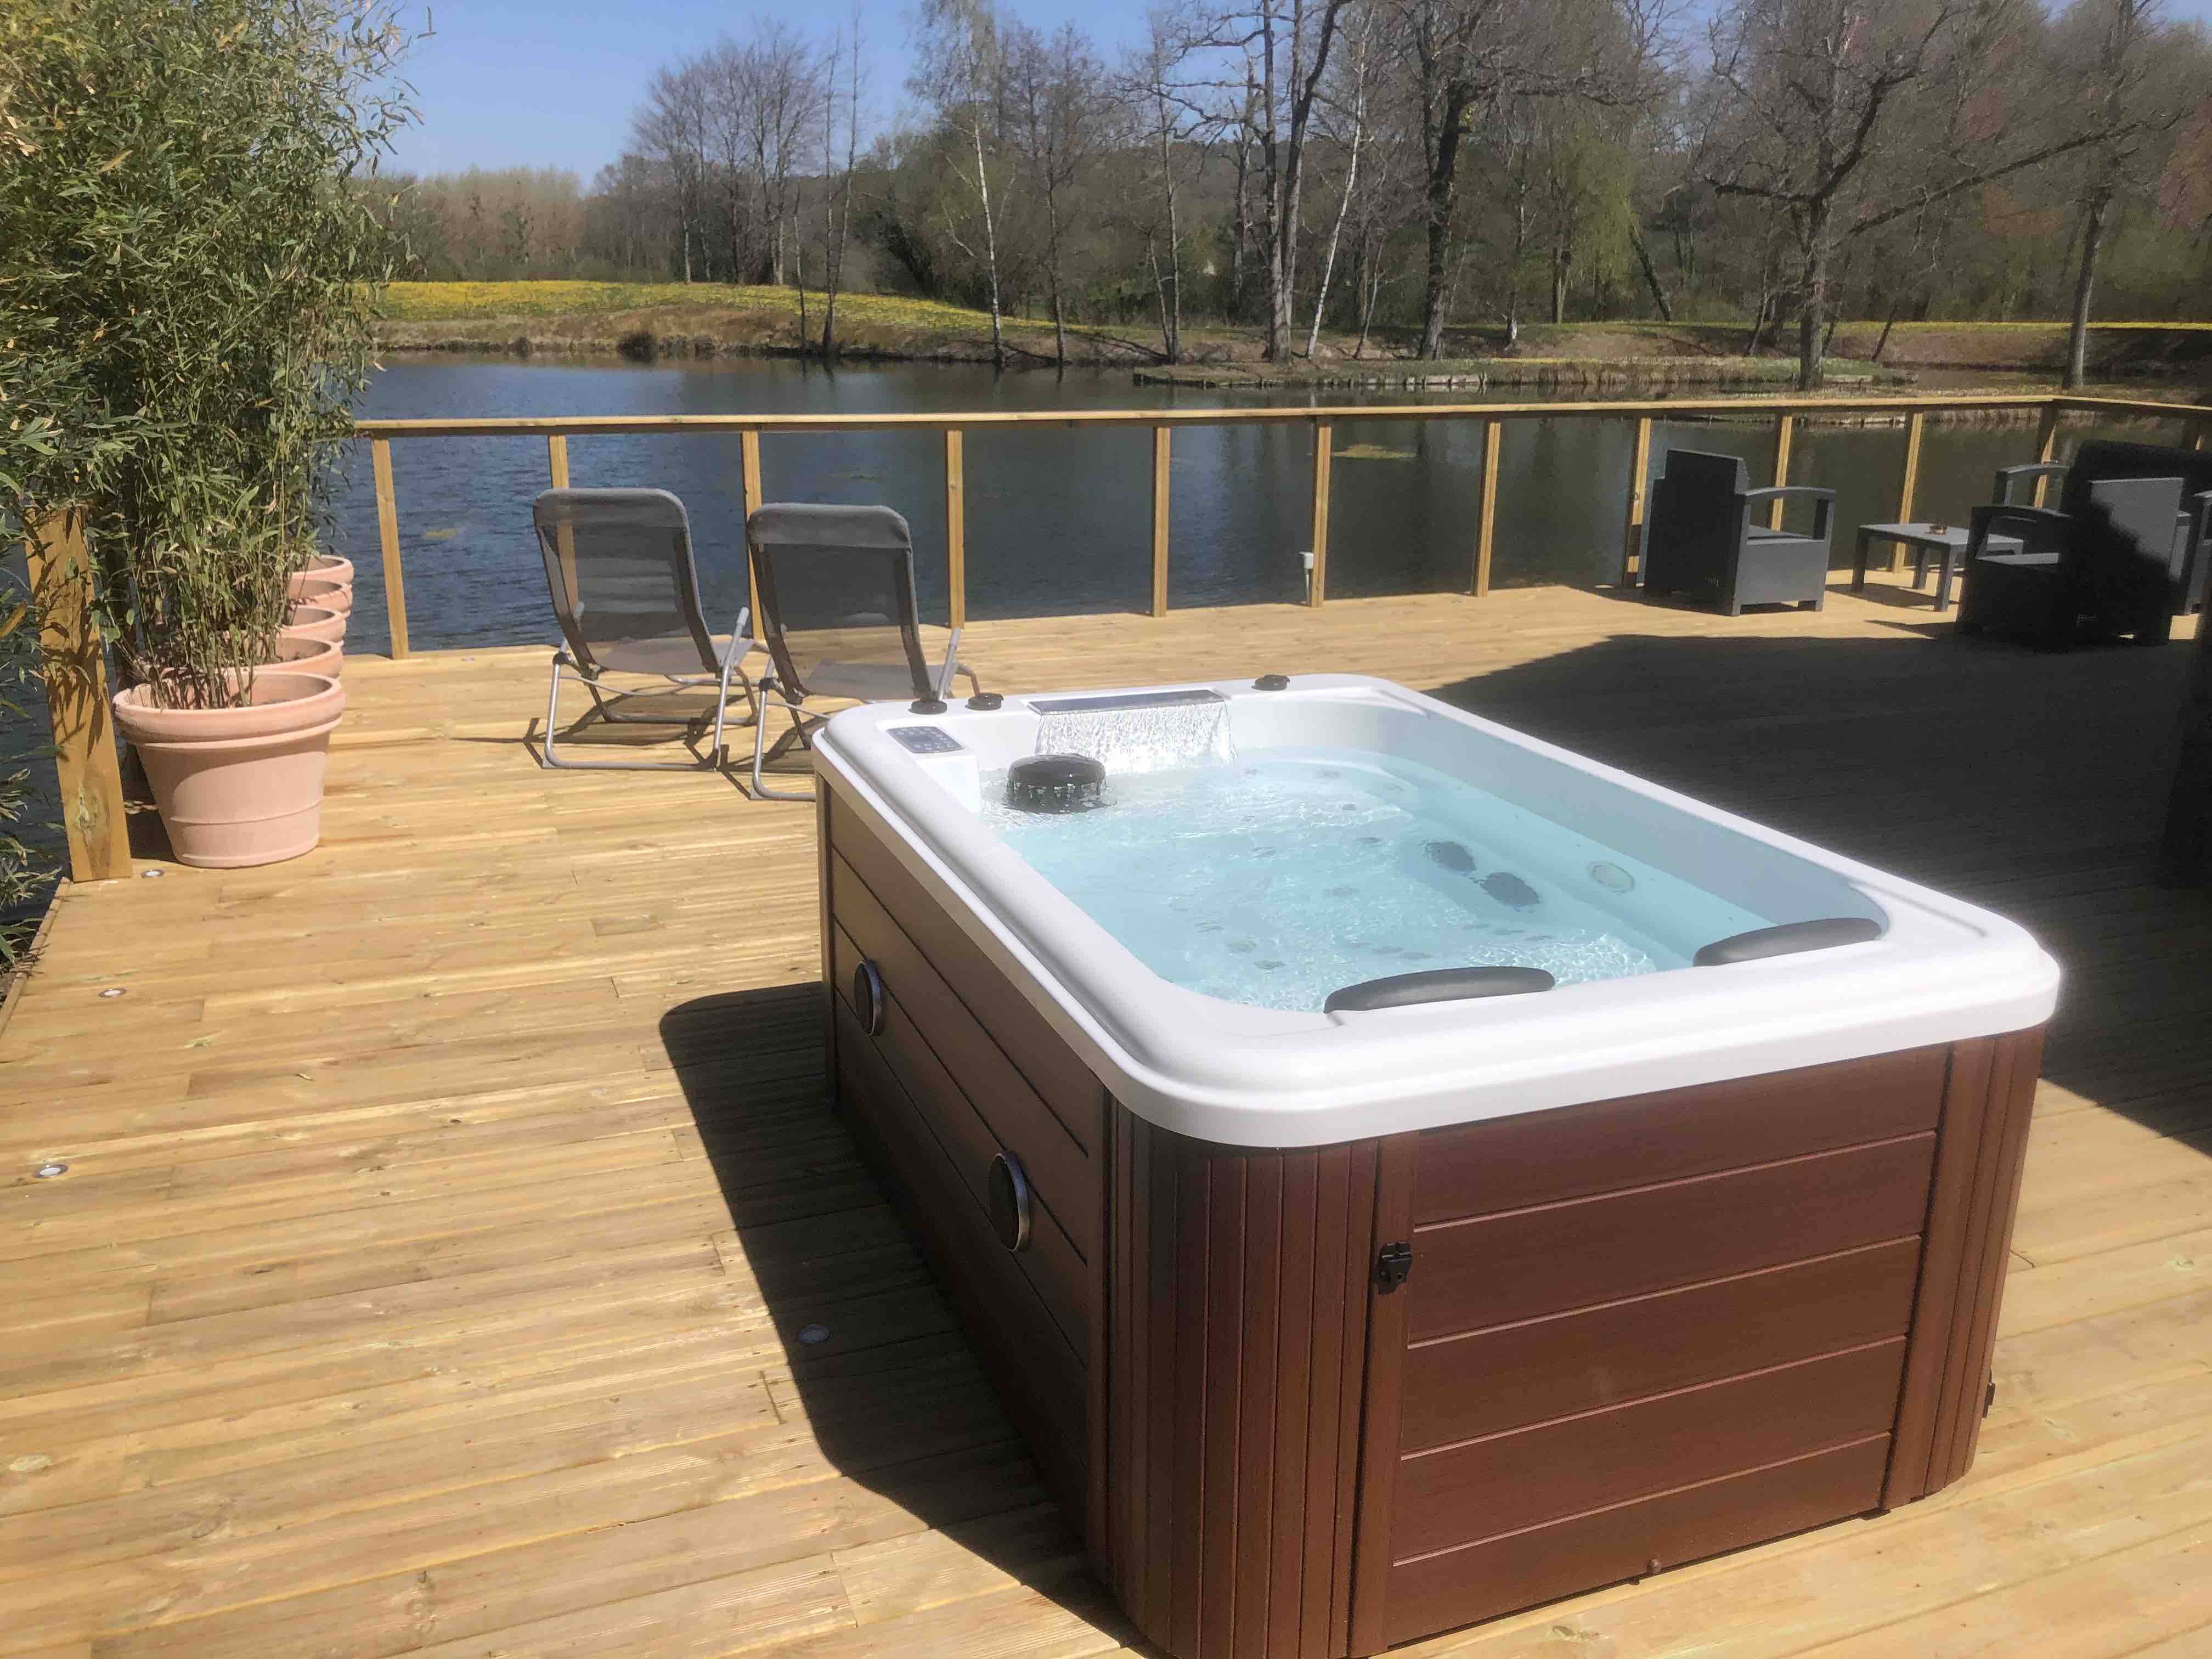 Exterior shot of a jacuzzi on timber decking overlooking a small pond and woodland.